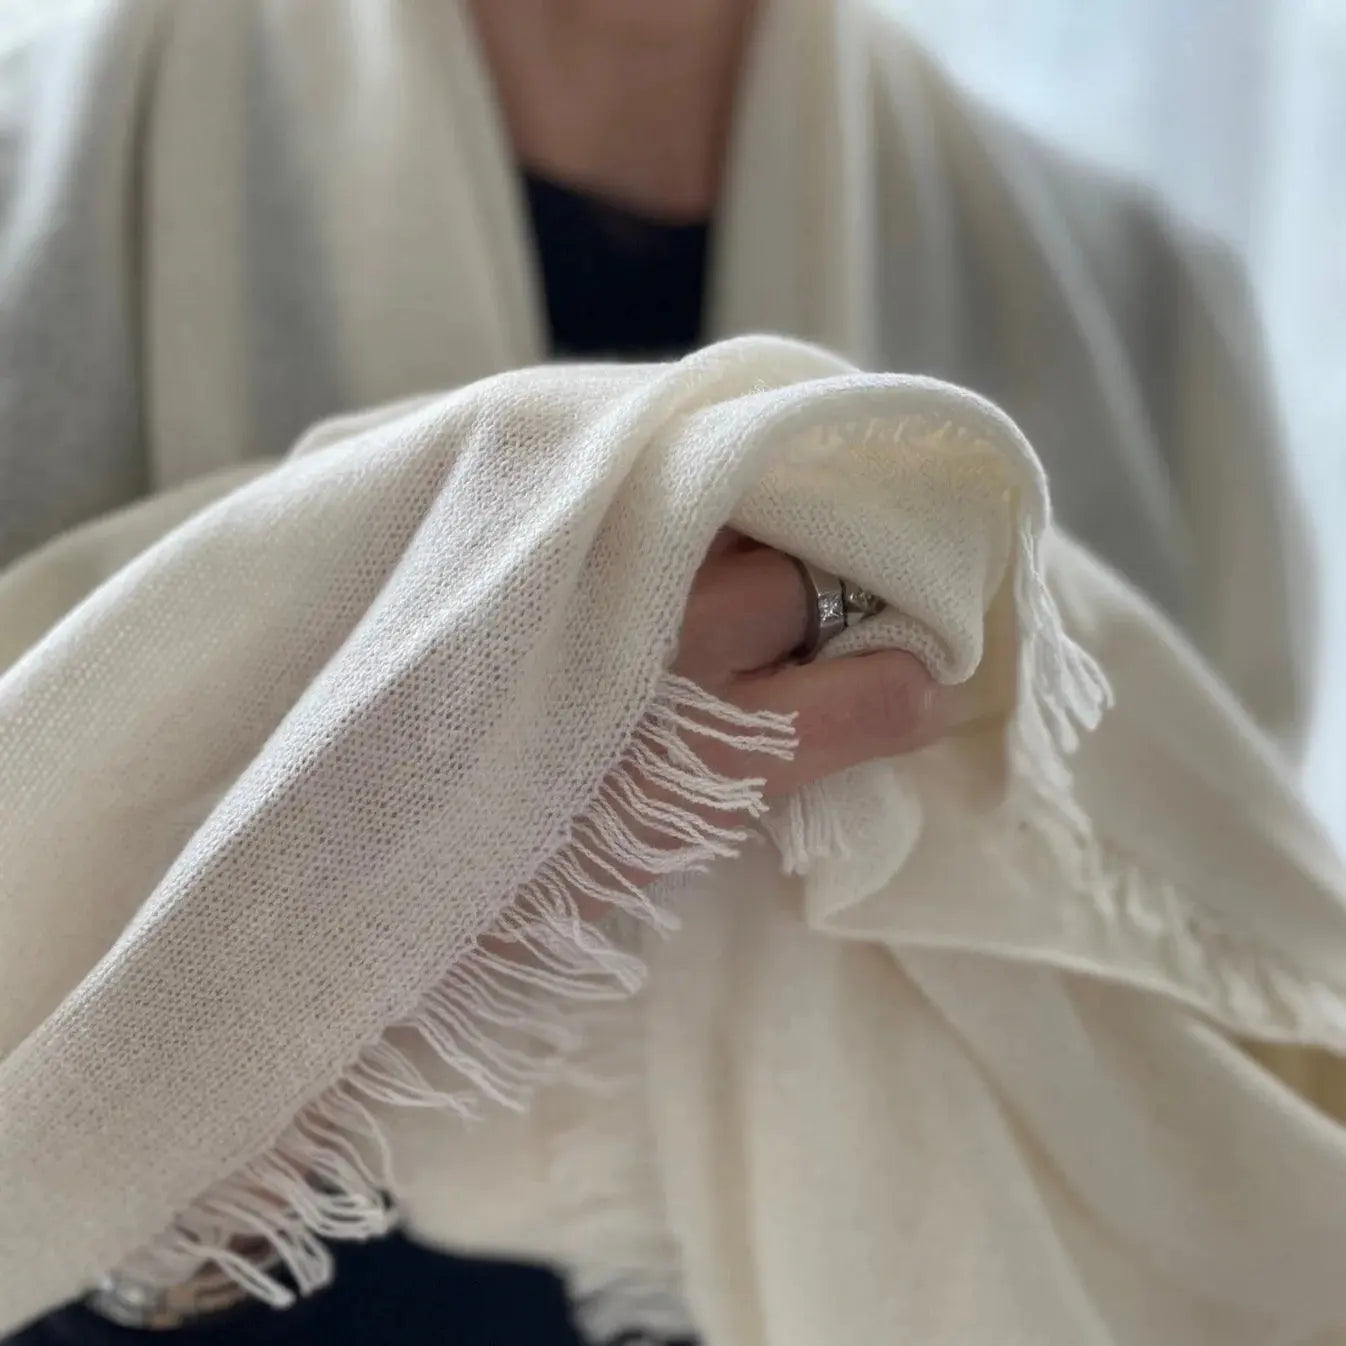 Fringed Cashmere Wrap Loomwares